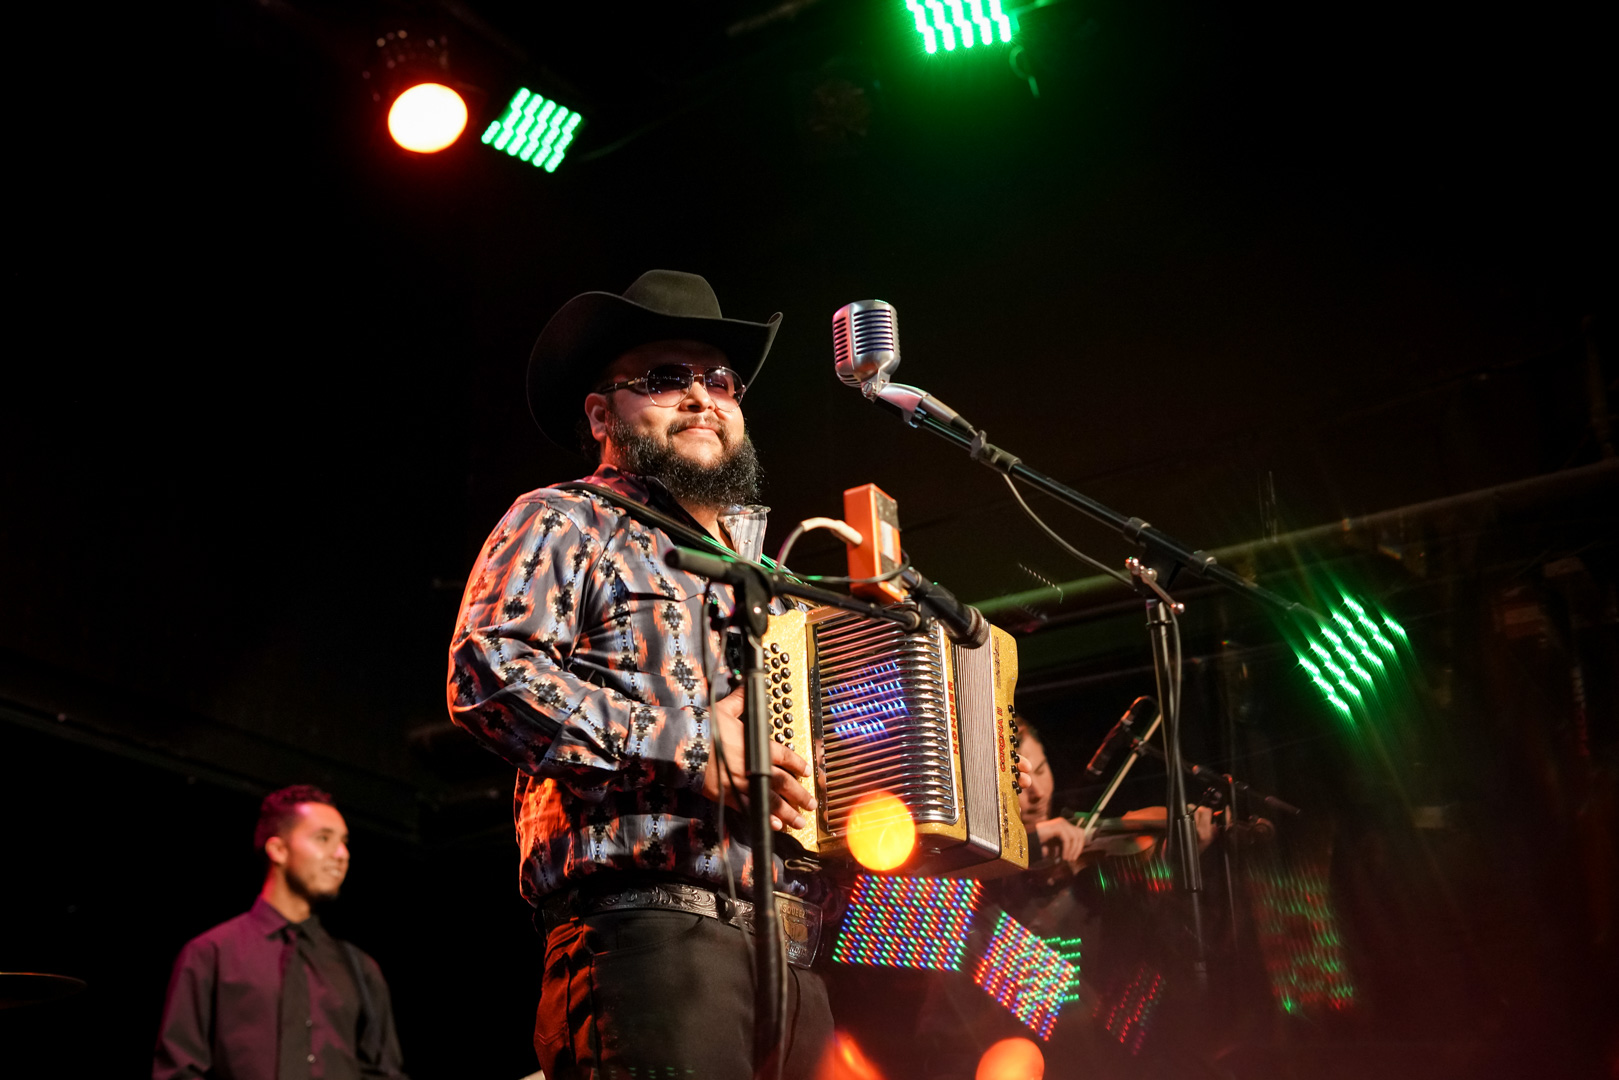 An accordion played smiles on stage